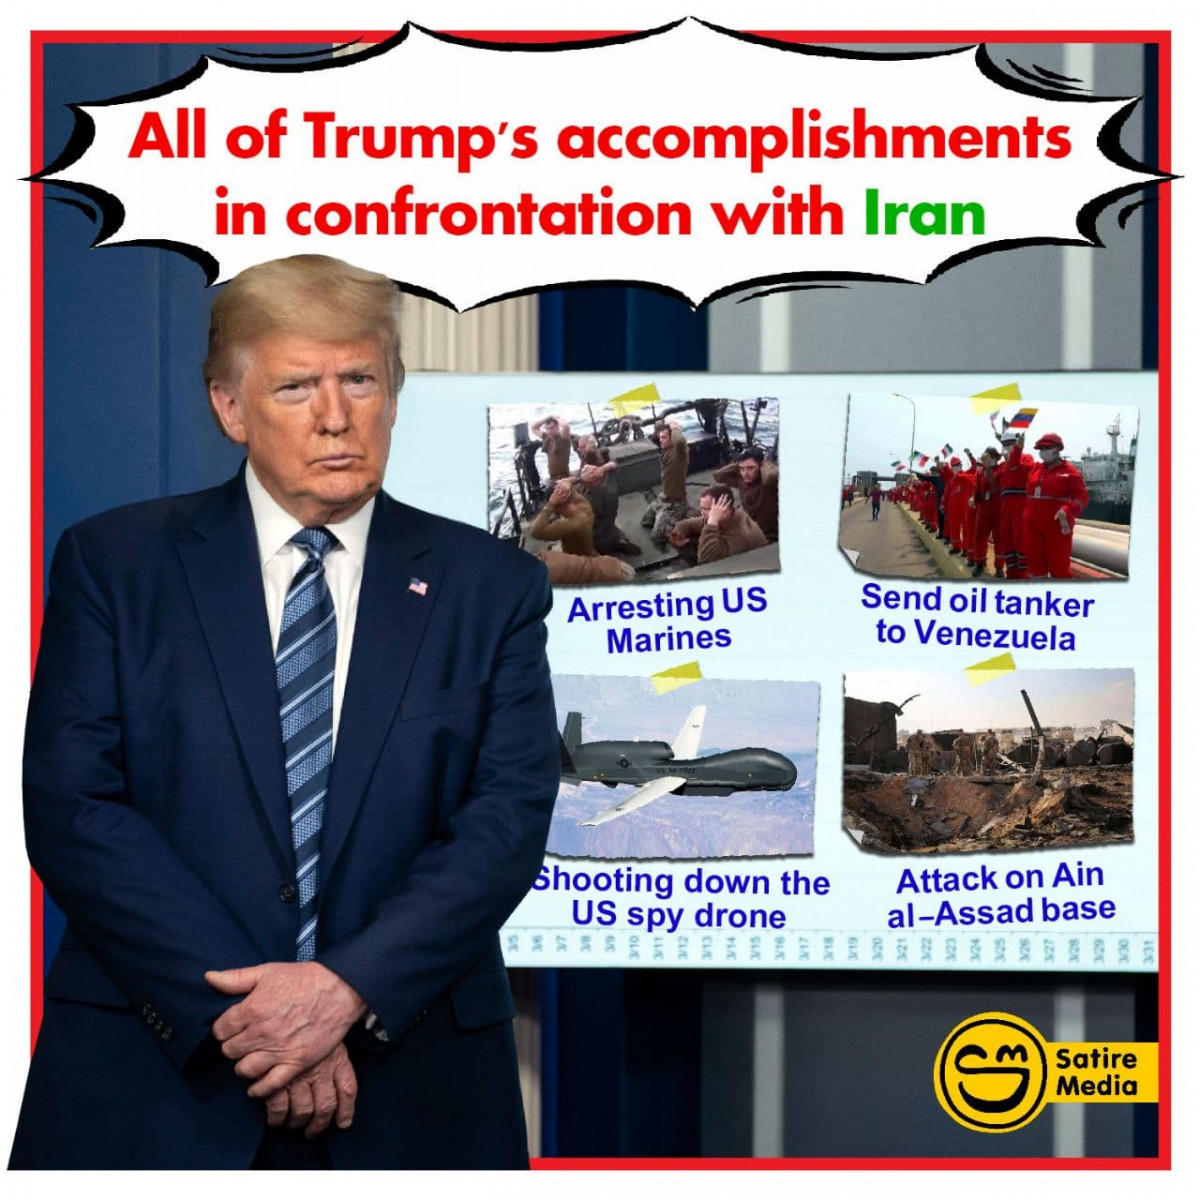 All of Trump's accomplishments in confrontation with Iran